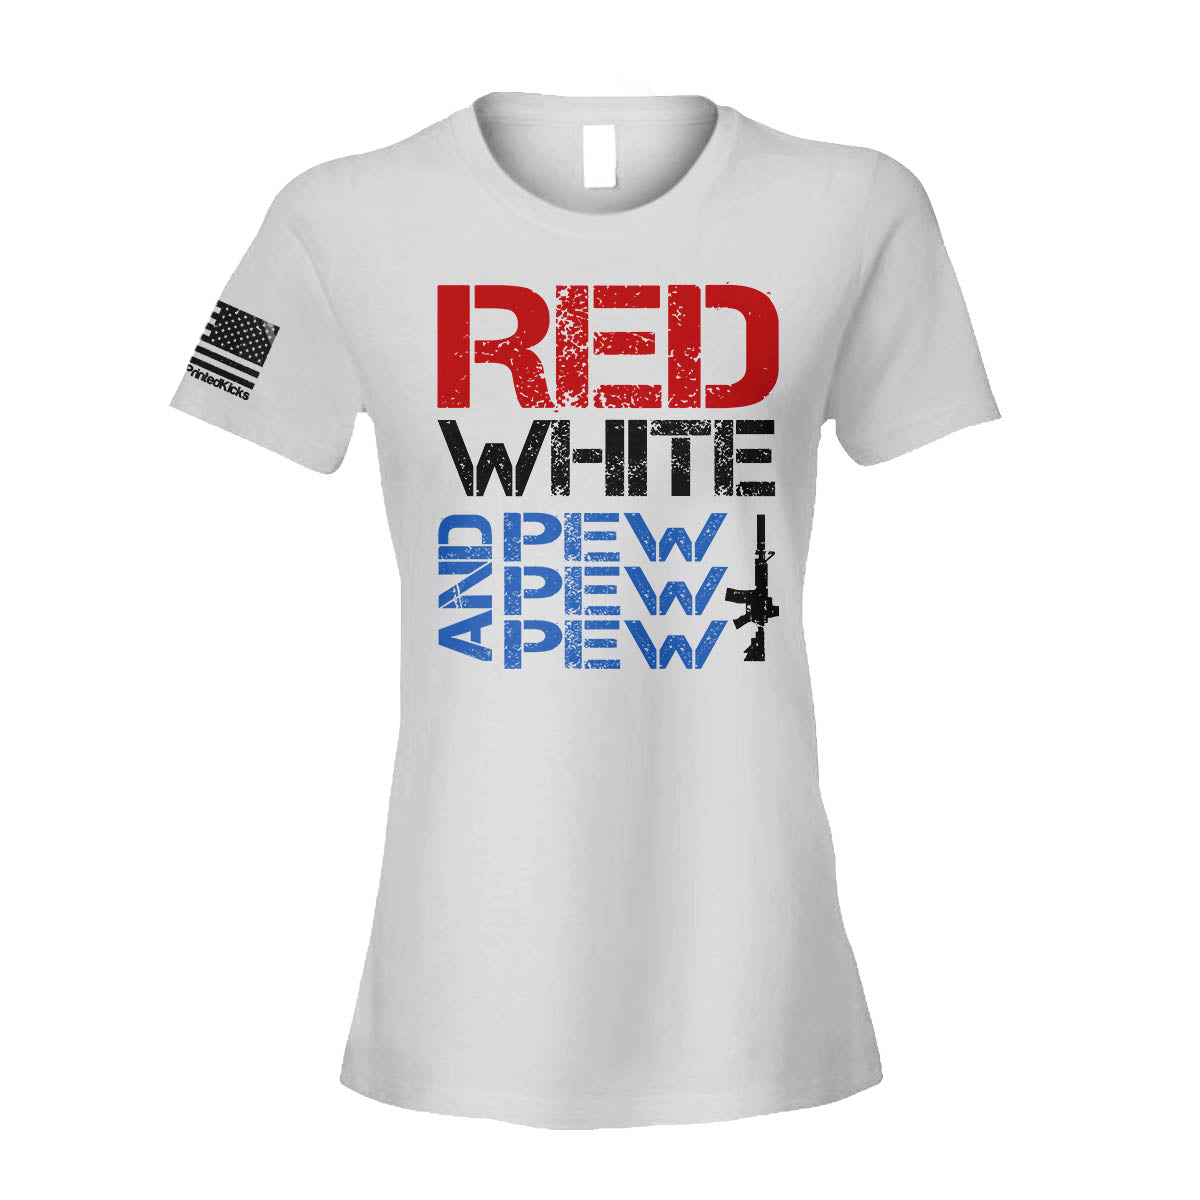 red white and pew shirt